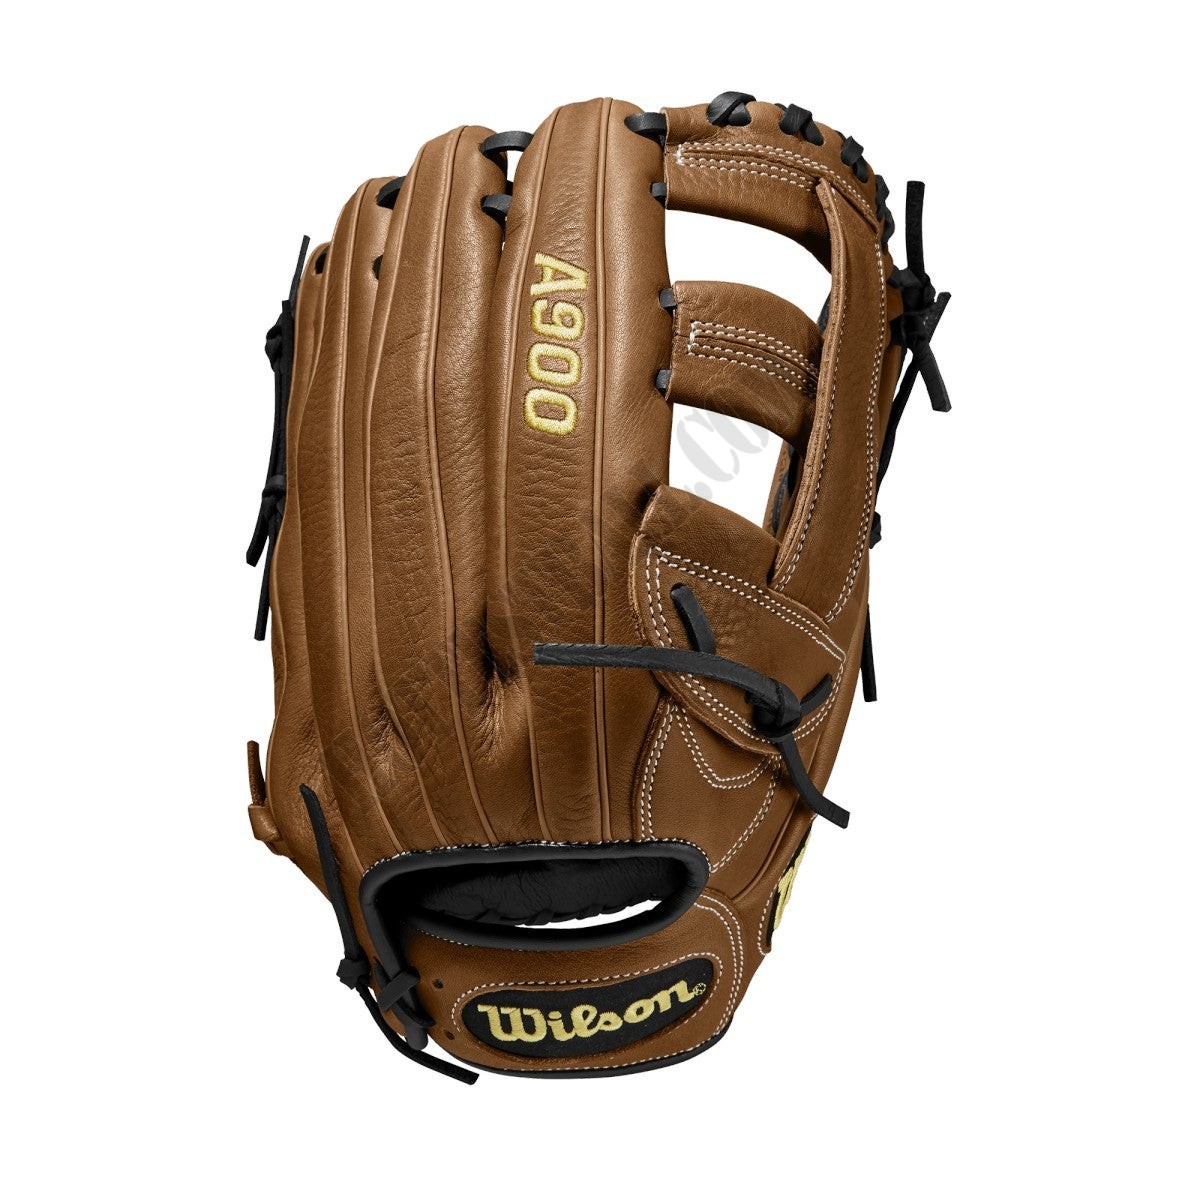 2020 A900 13" Slowpitch Glove ● Wilson Promotions - -1